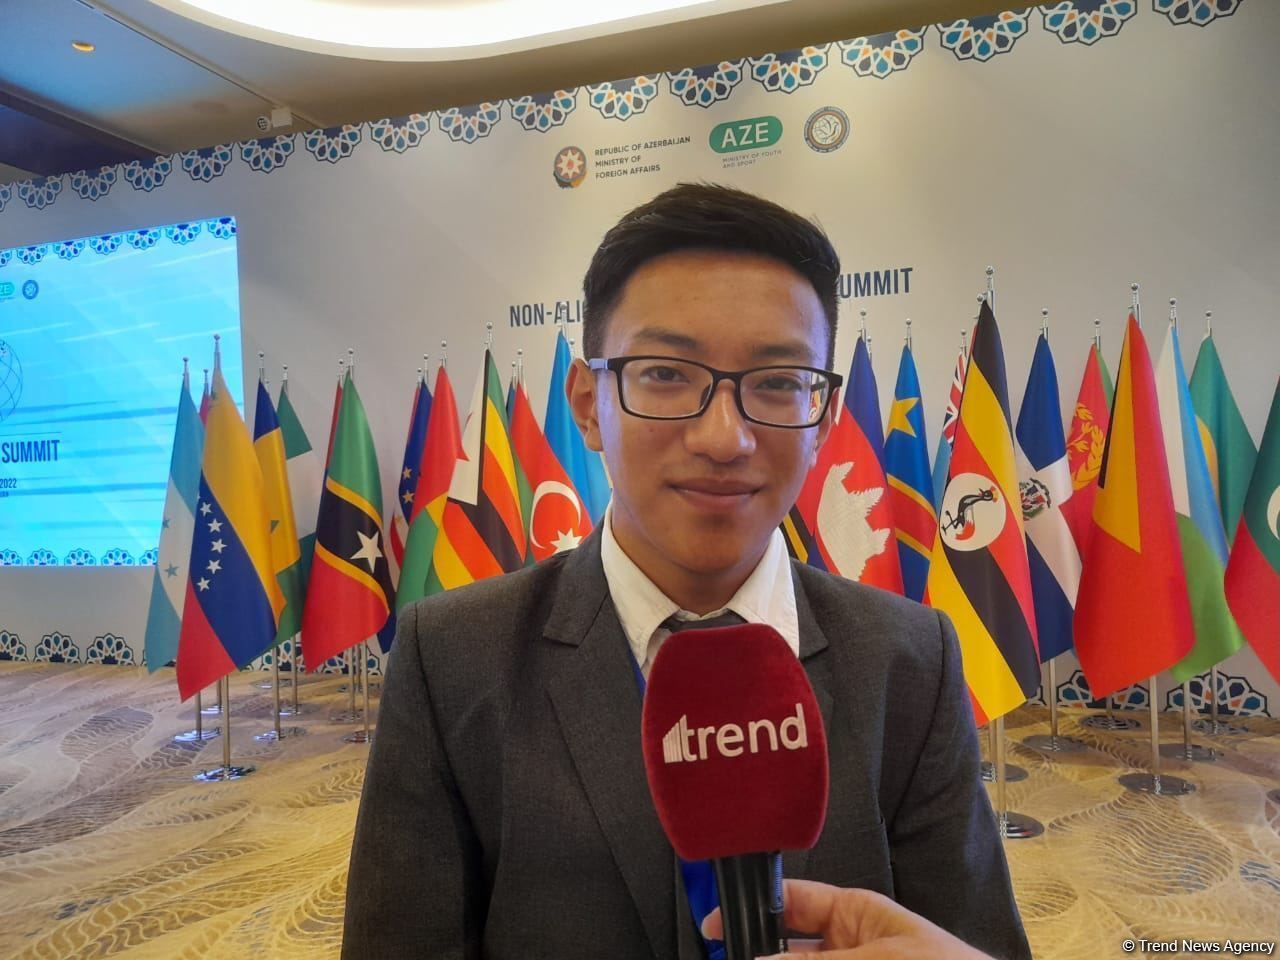 NAM Summit in Baku - excellent platform to discuss youth ideas, guest from Bhutan says [VIDEO]